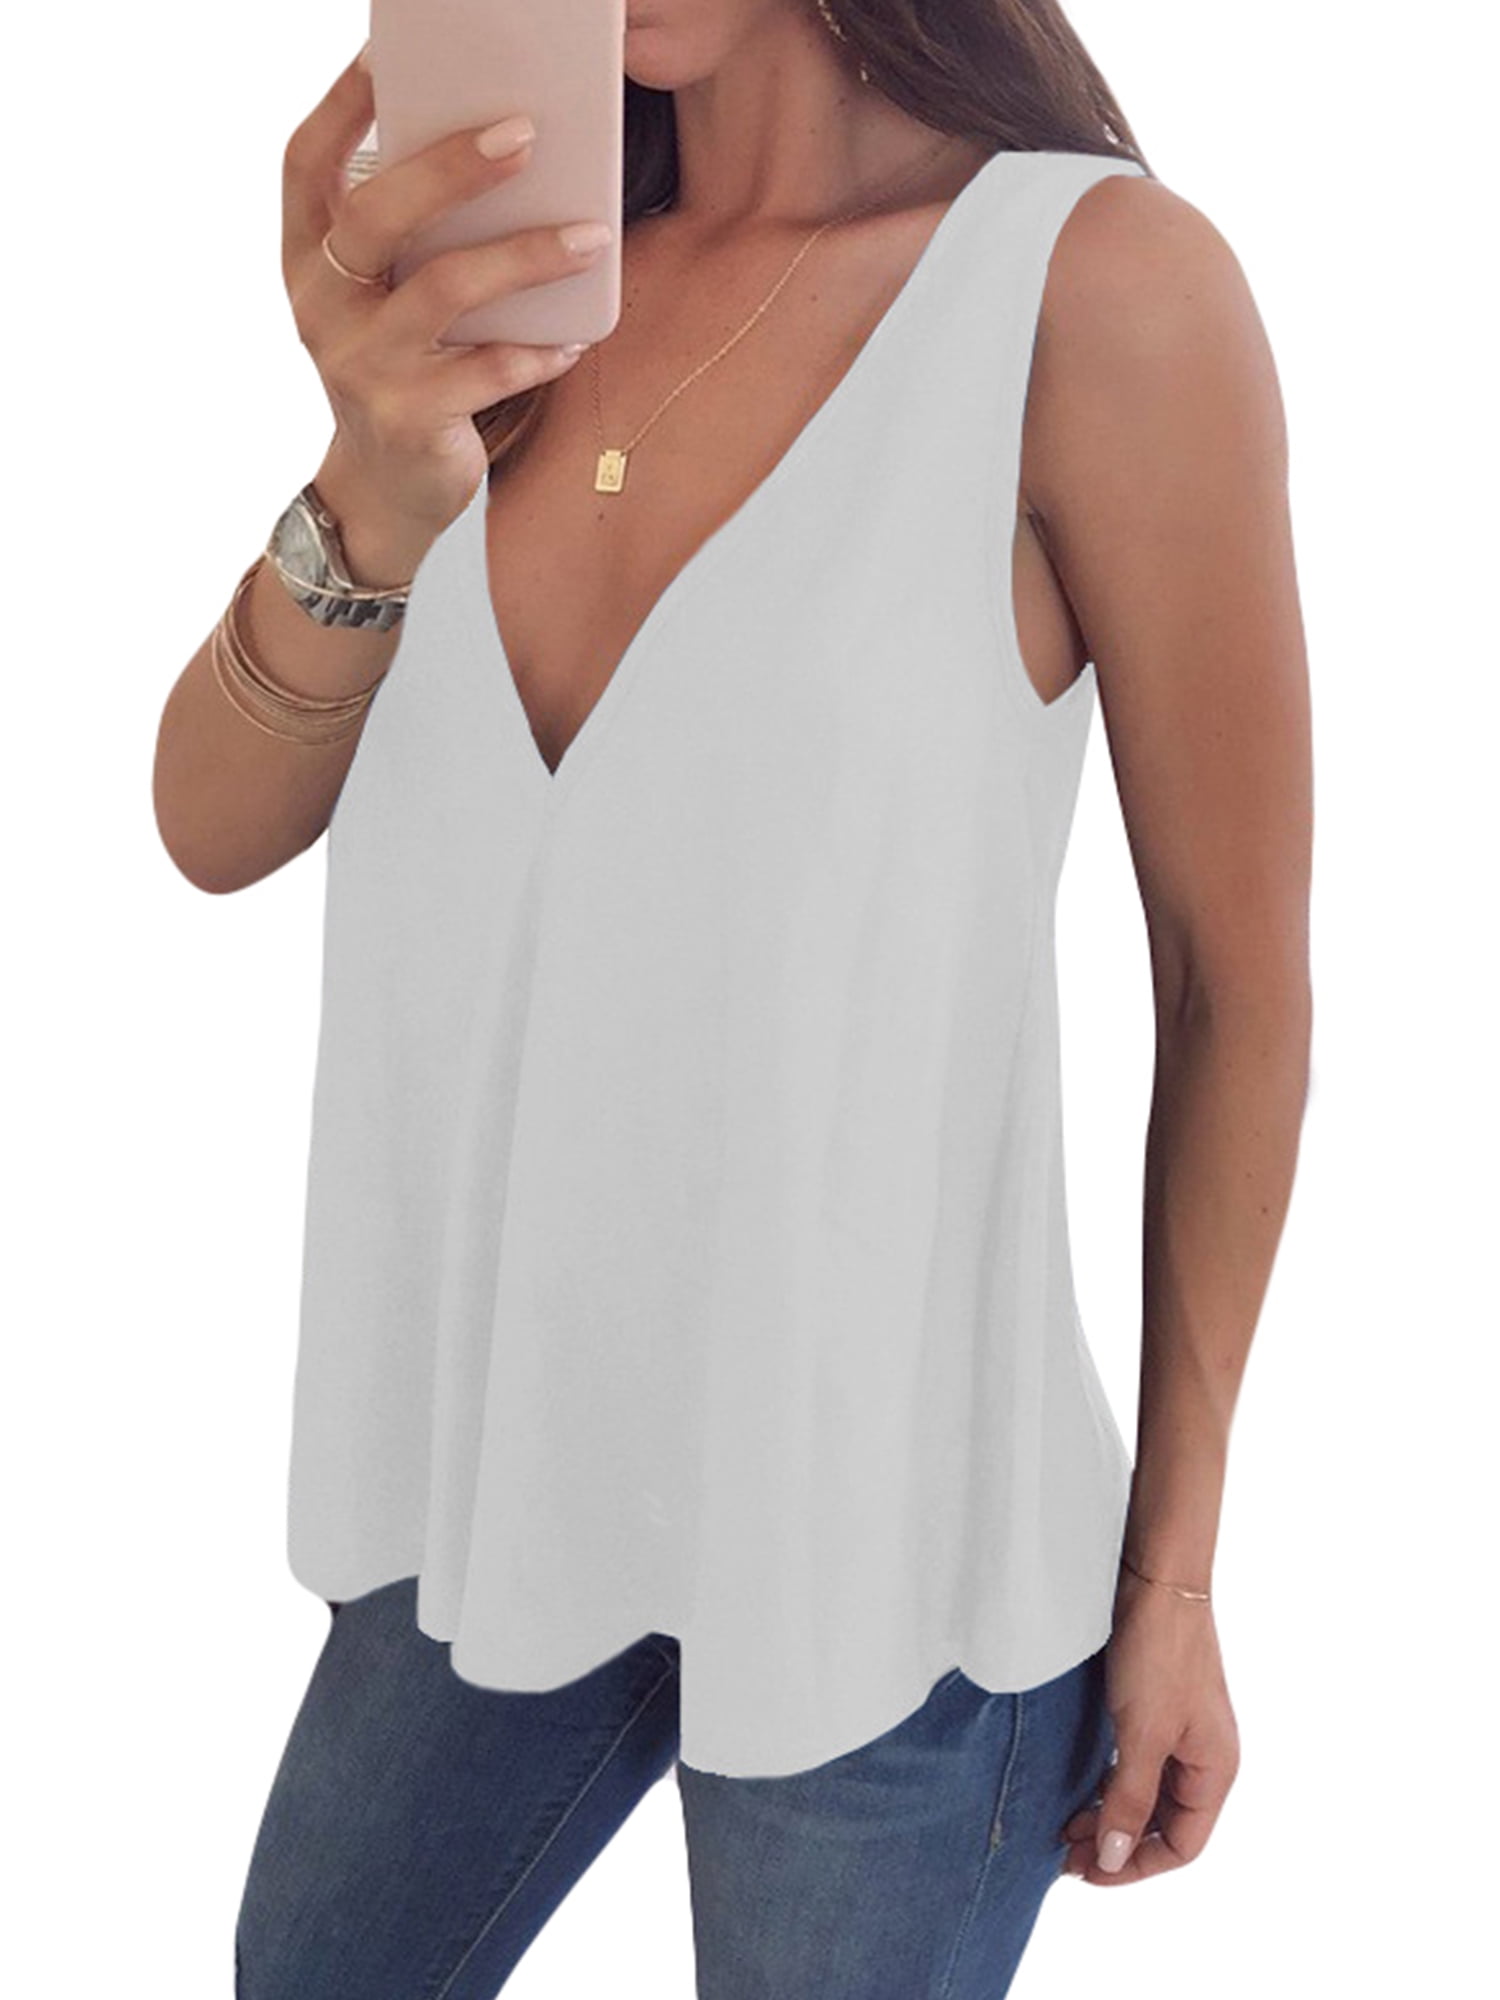 Details about   Traleubie Round Neck Workout Tank Tops for Women Casual Sleeveless Shirts Loose 